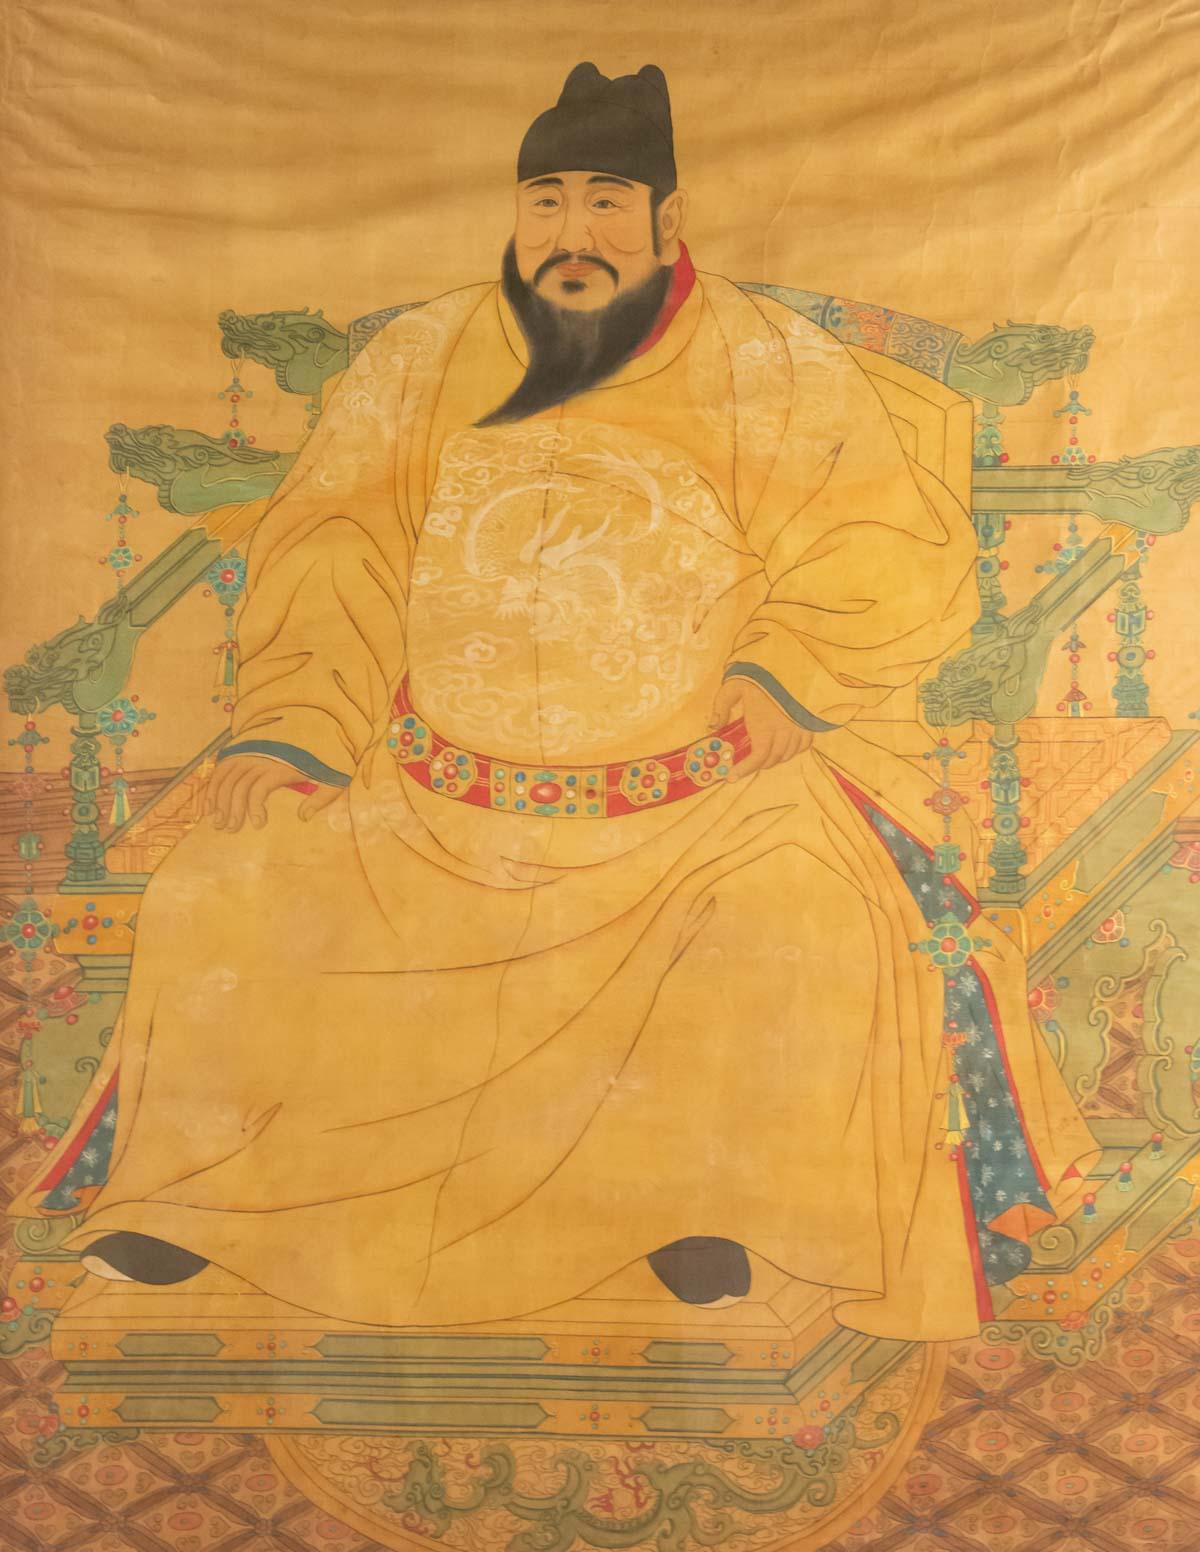 Portrait of Emperor Yongle on his throne. Painting on fabric, early 20th century, 3rd Emperor of the Ming dynasty. 
Measures: H 105cm, W 87cm, W 3cm.